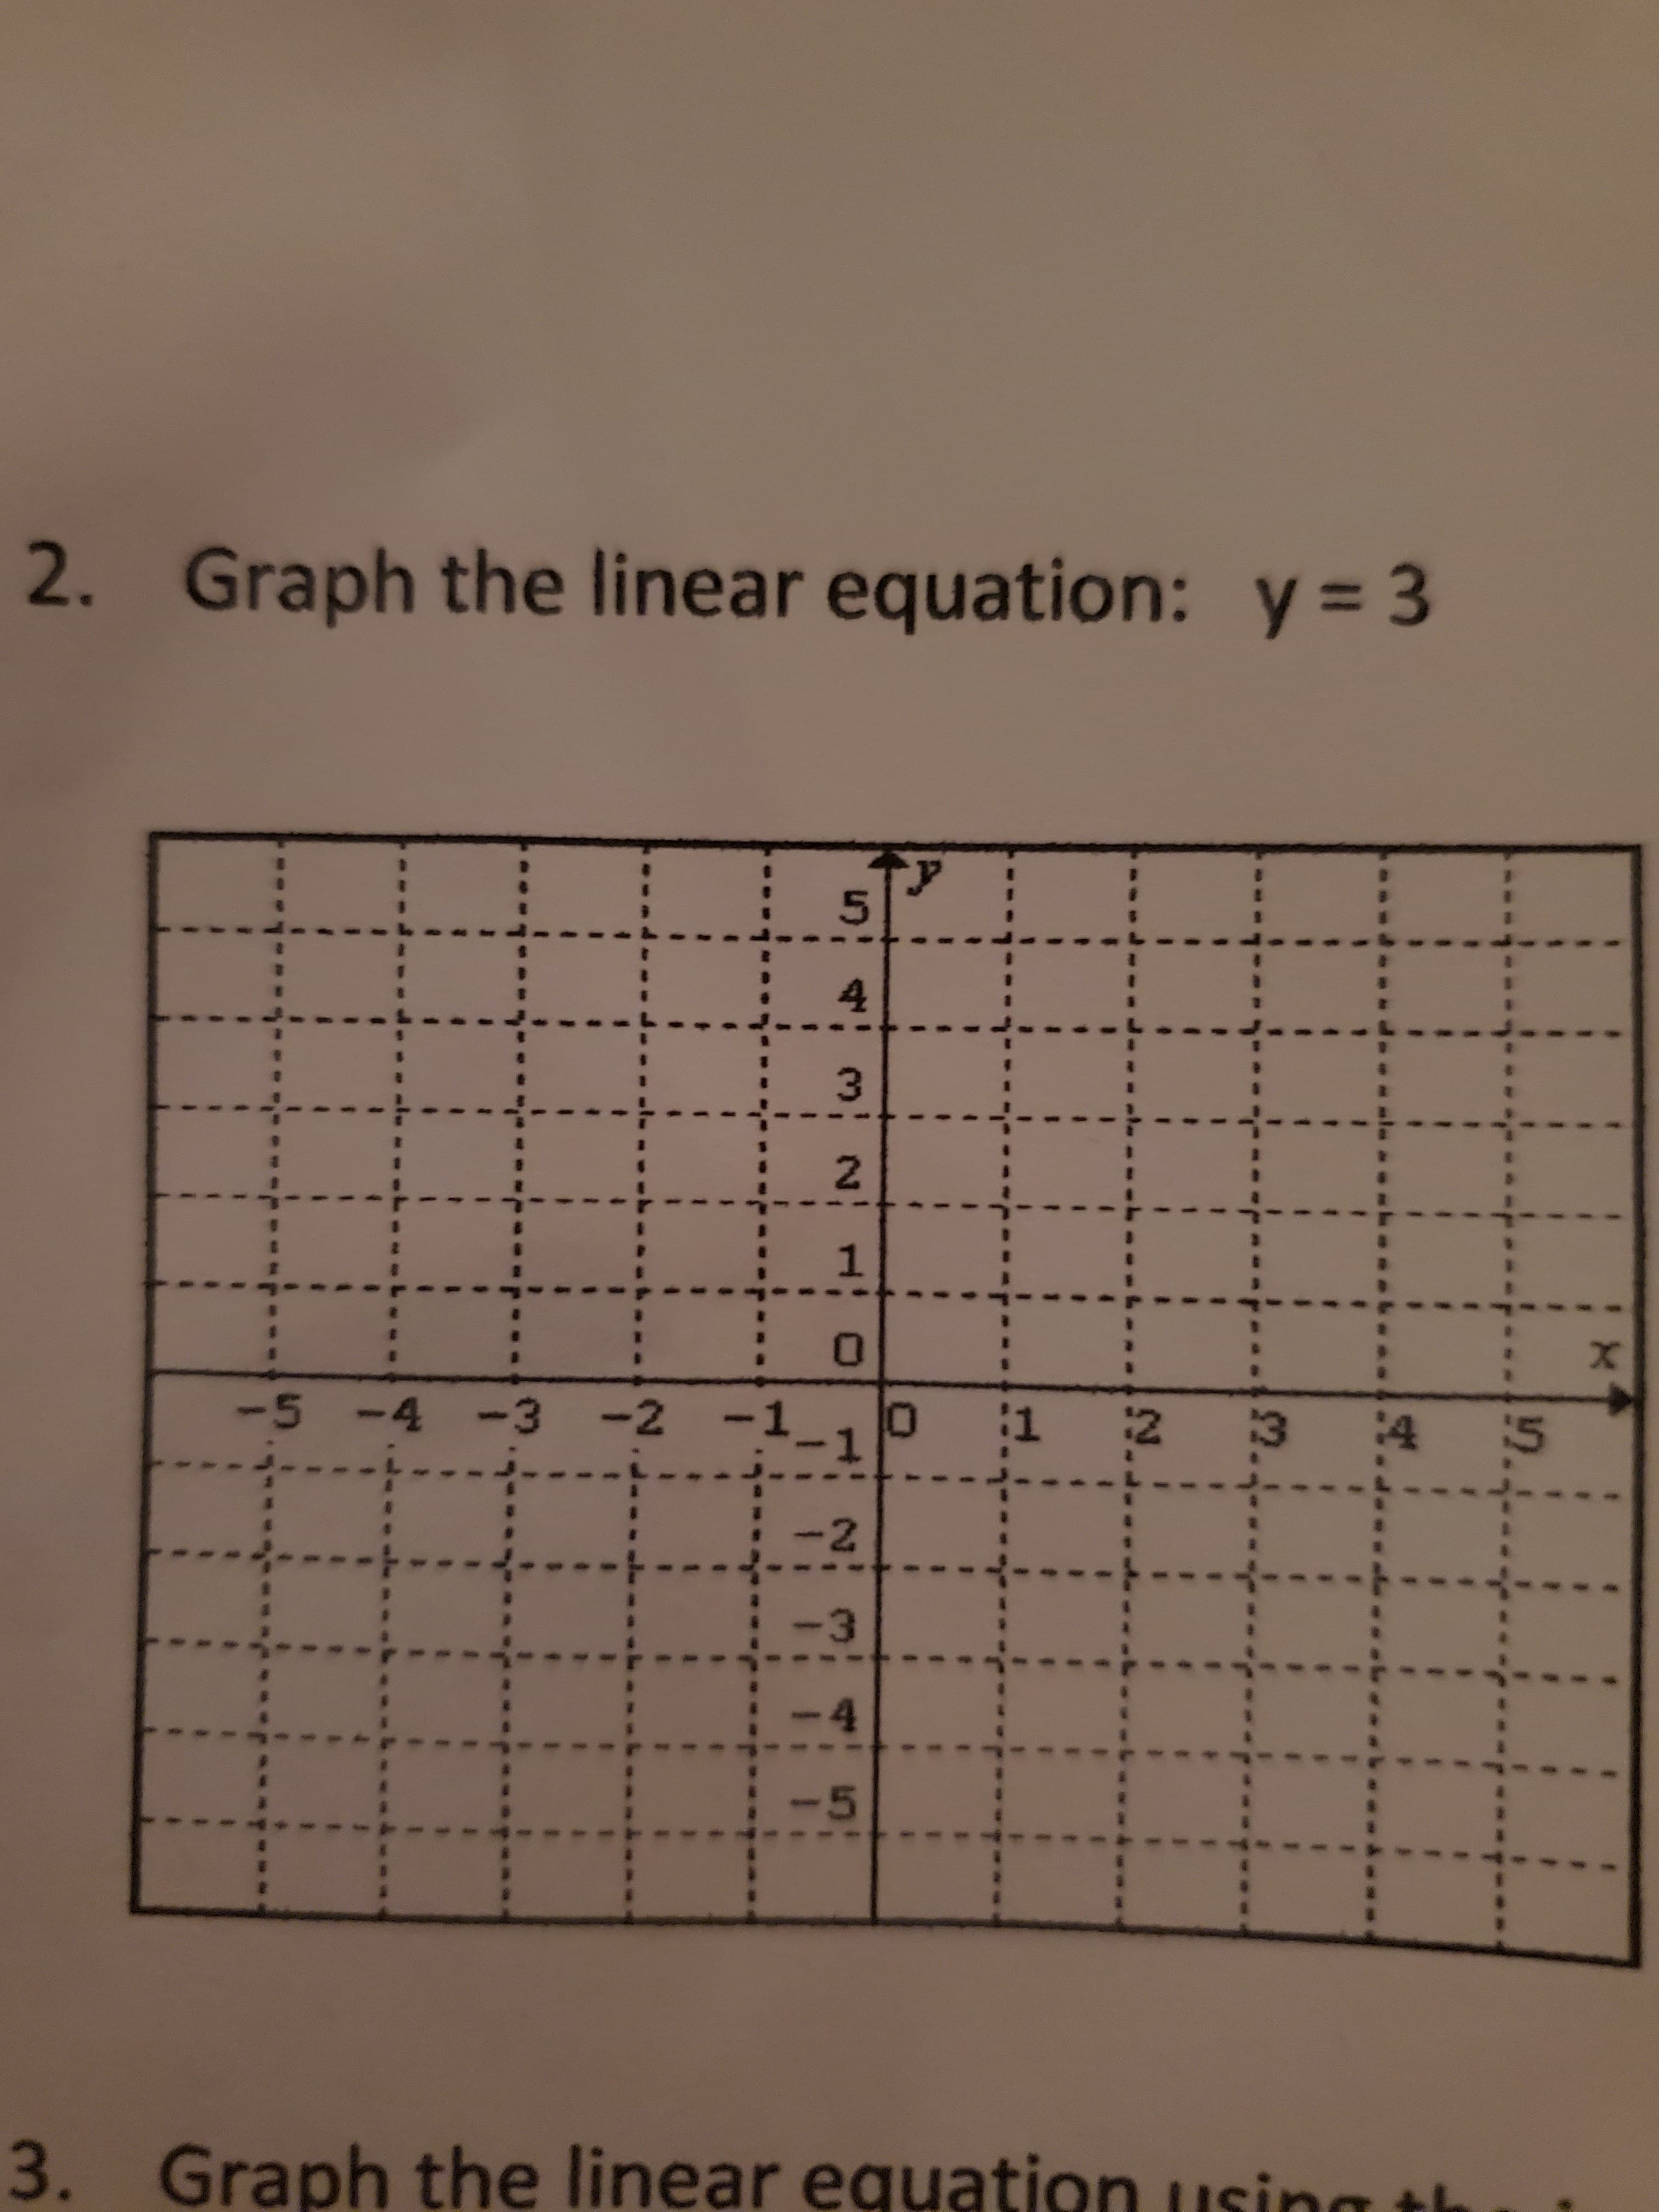 Graph the linear equation: y = 3
